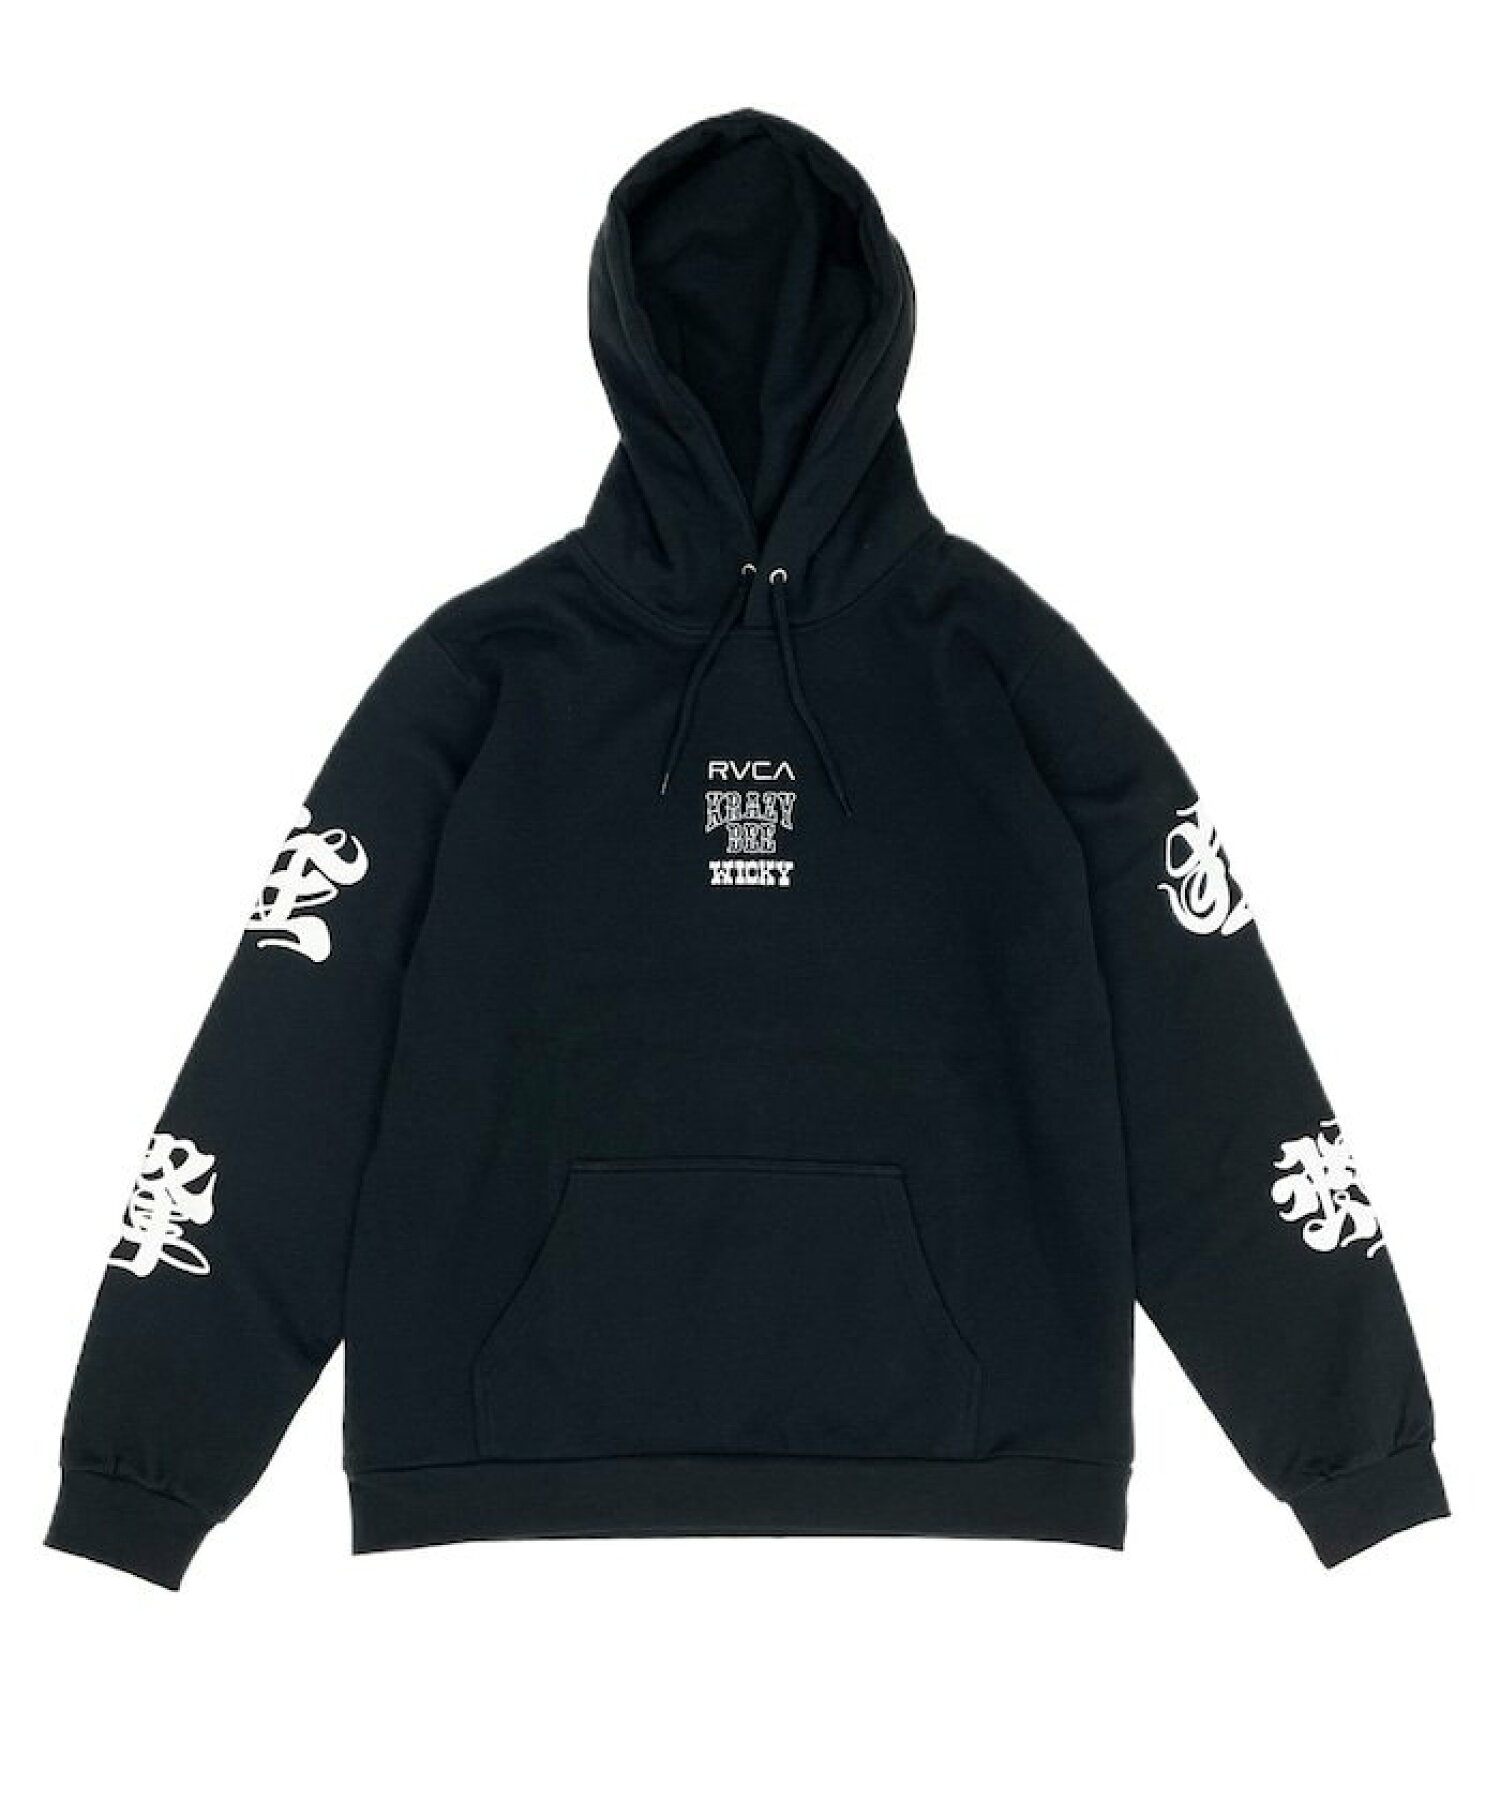 KRAZY BEE HOODIE / クレイジービー フーディ / バックプリント パーカー /  BE041P01 【限定展開】